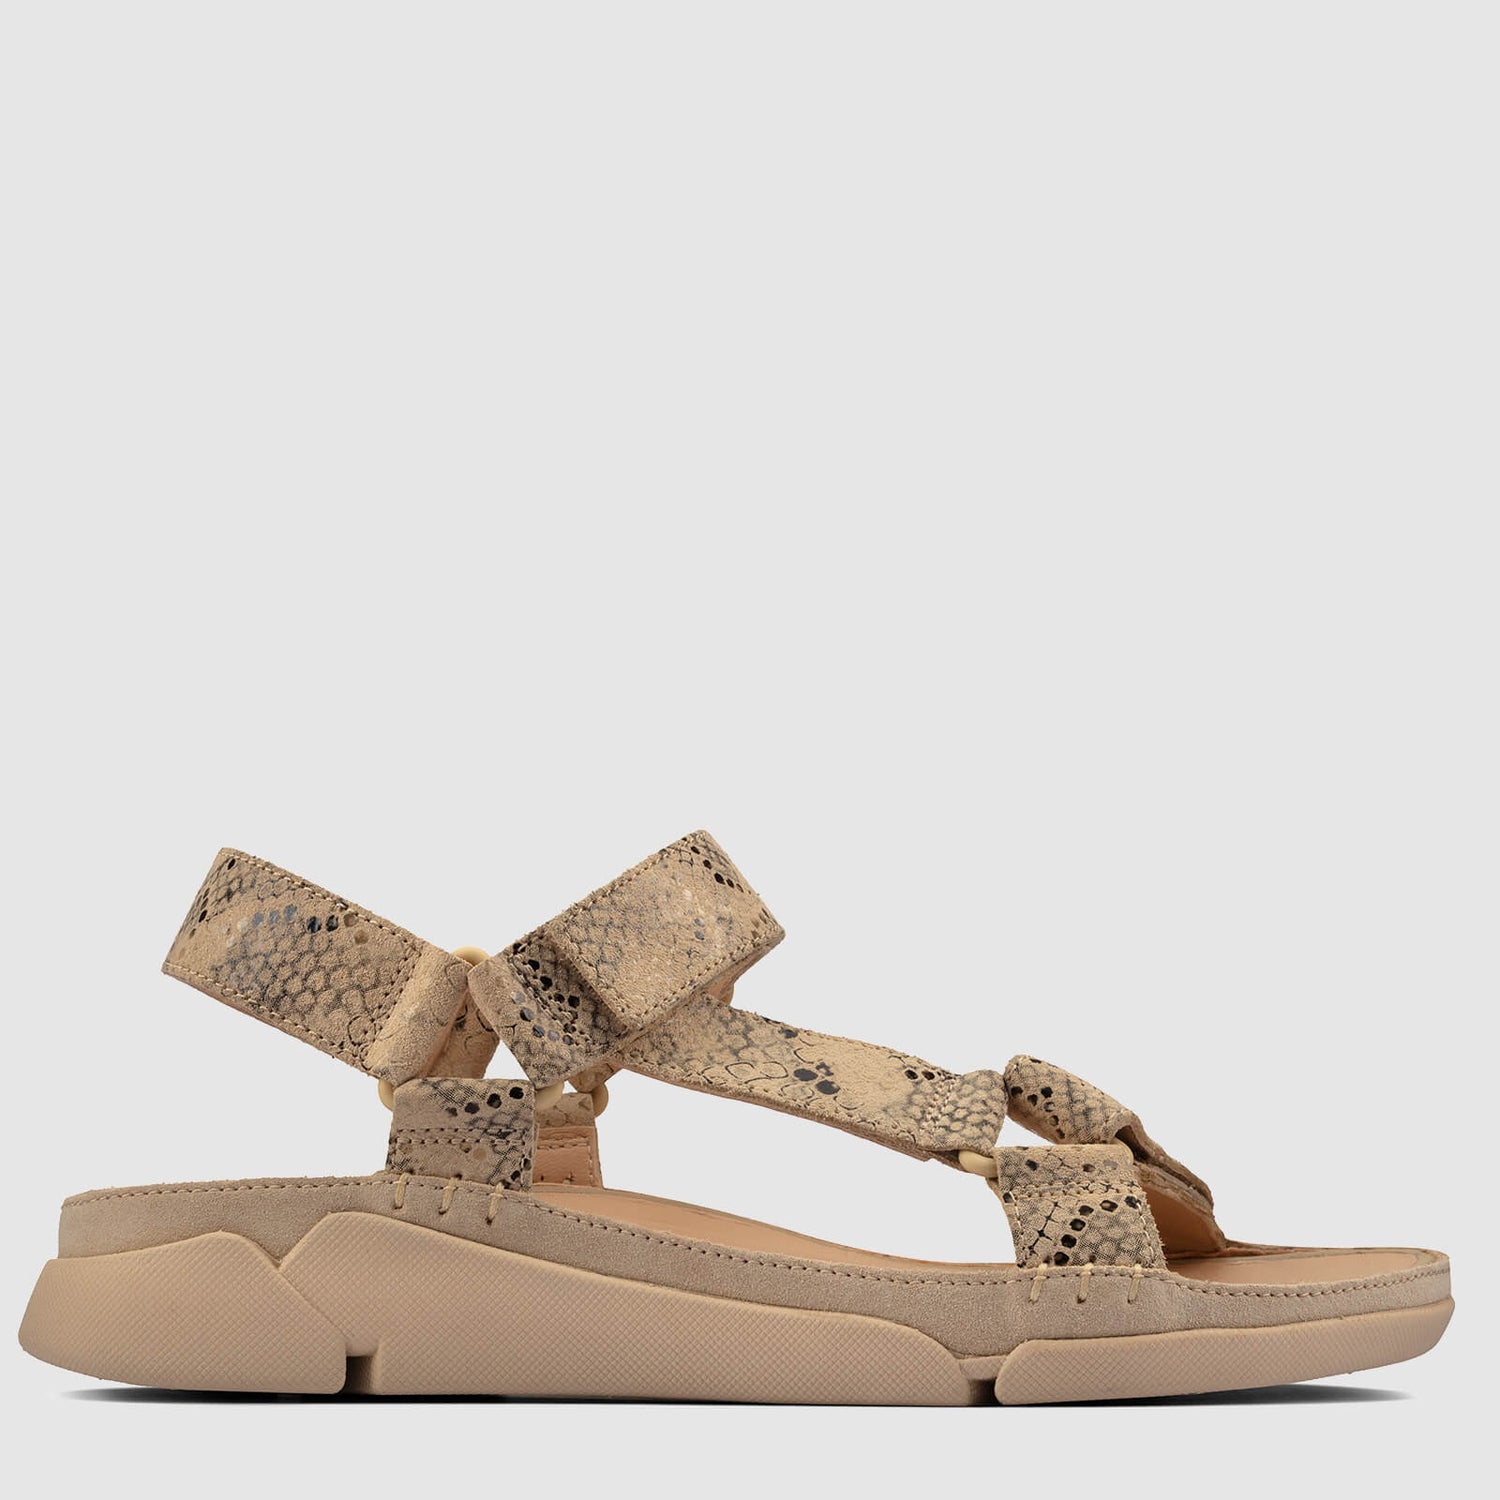 Clarks Women's Tri Sporty Sandals - Taupe Snake